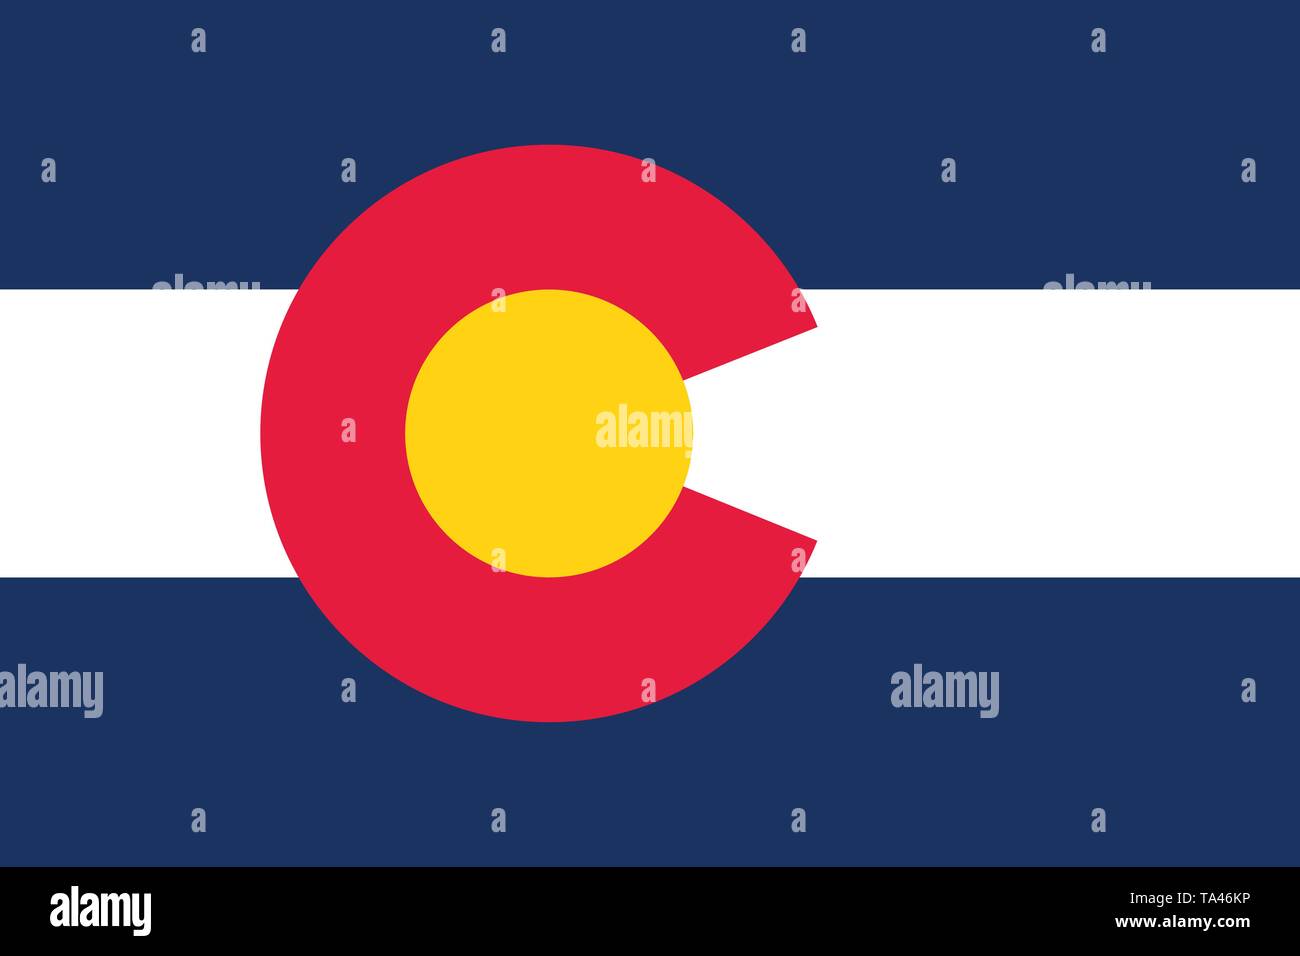 Colorado state flag. USA state symbol.Vector illustration Stock Vector